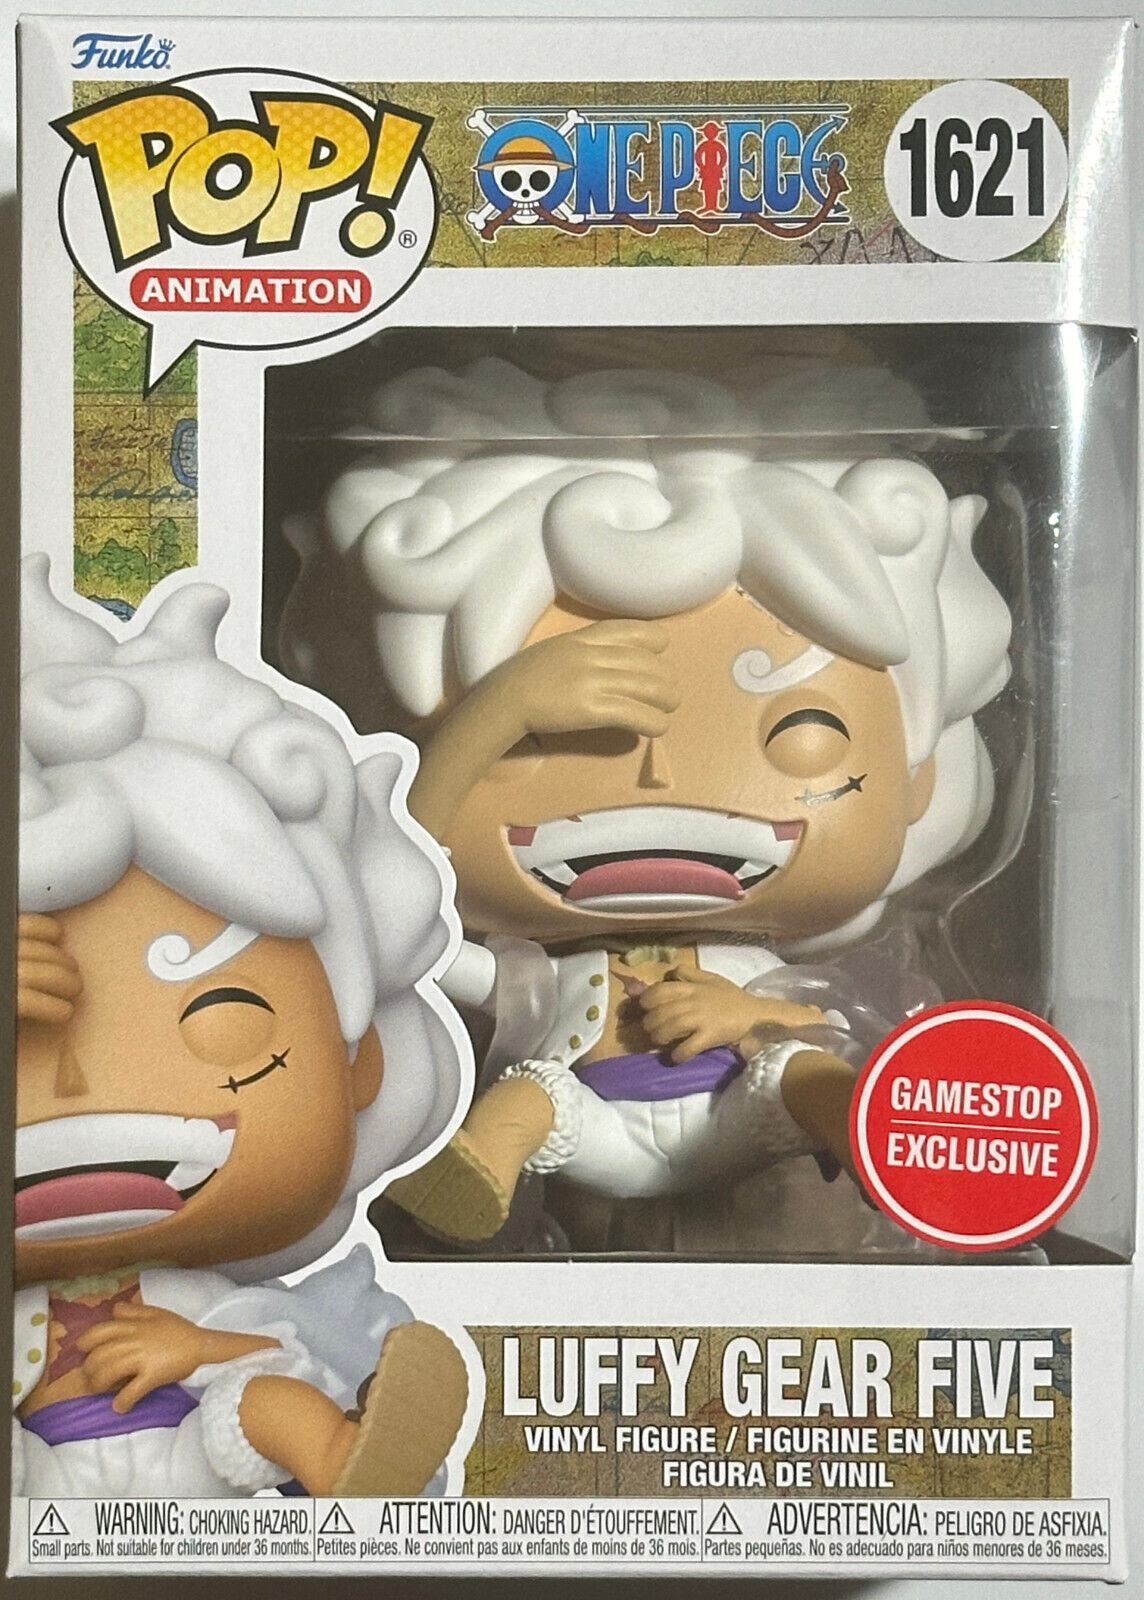 Funko Pop Anmation One Piece Luffy Gear Five 1621 GameStop Exclusive Brand New